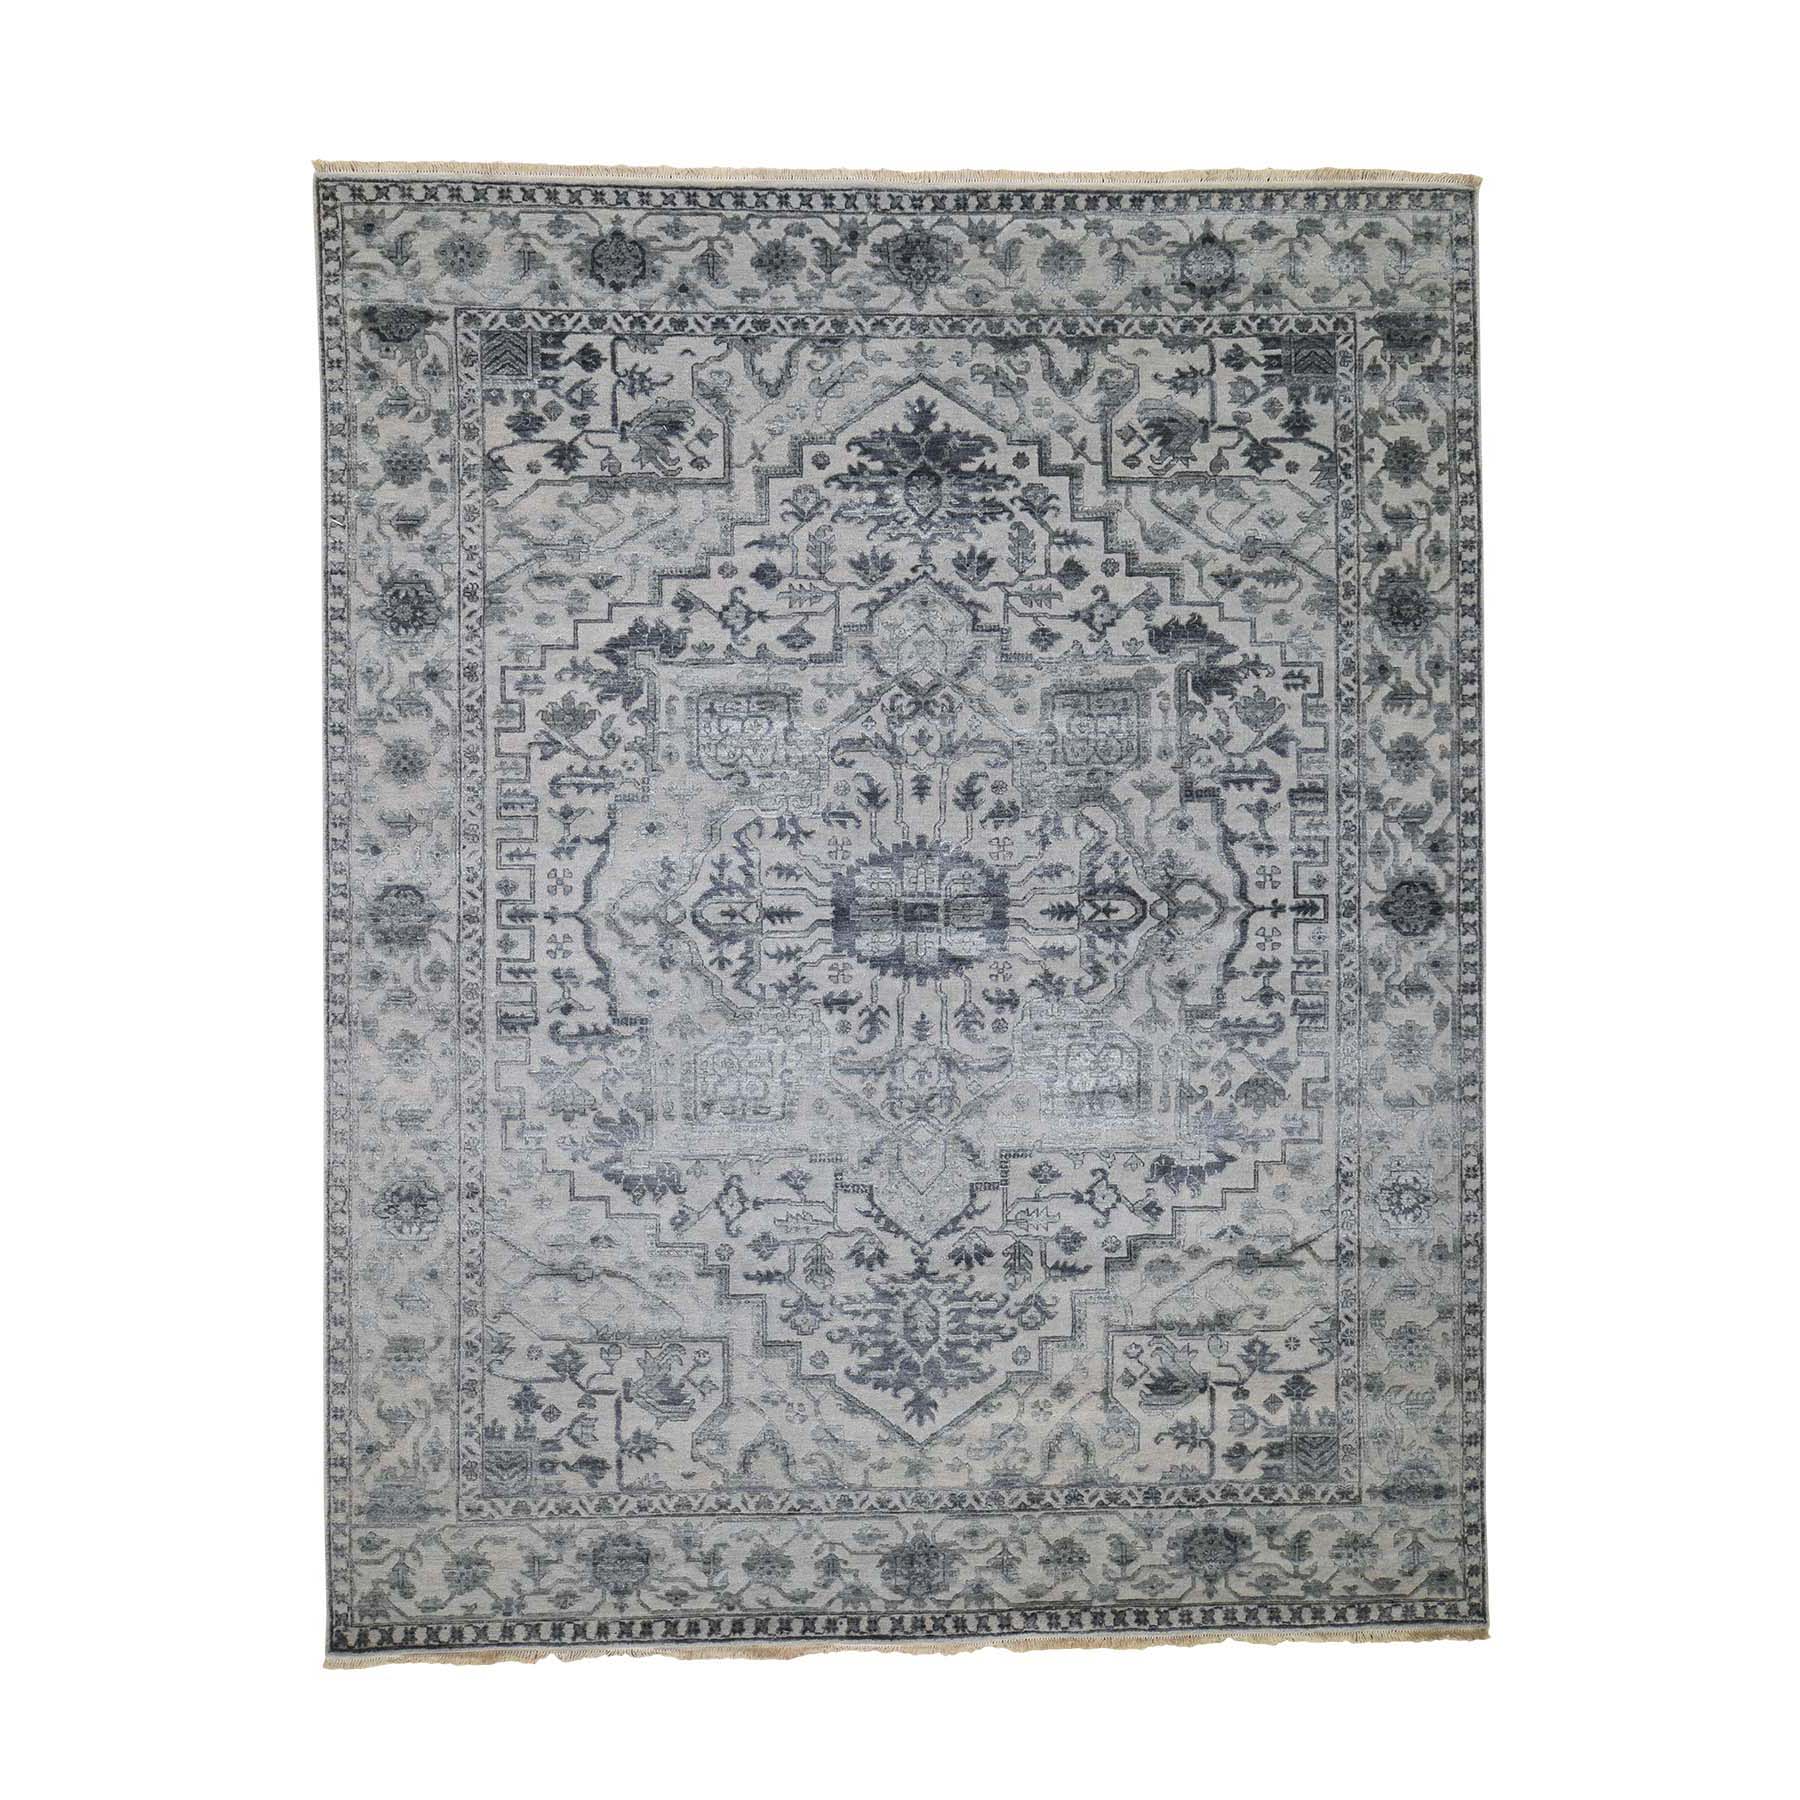  Silk Hand-Knotted Area Rug 8'1